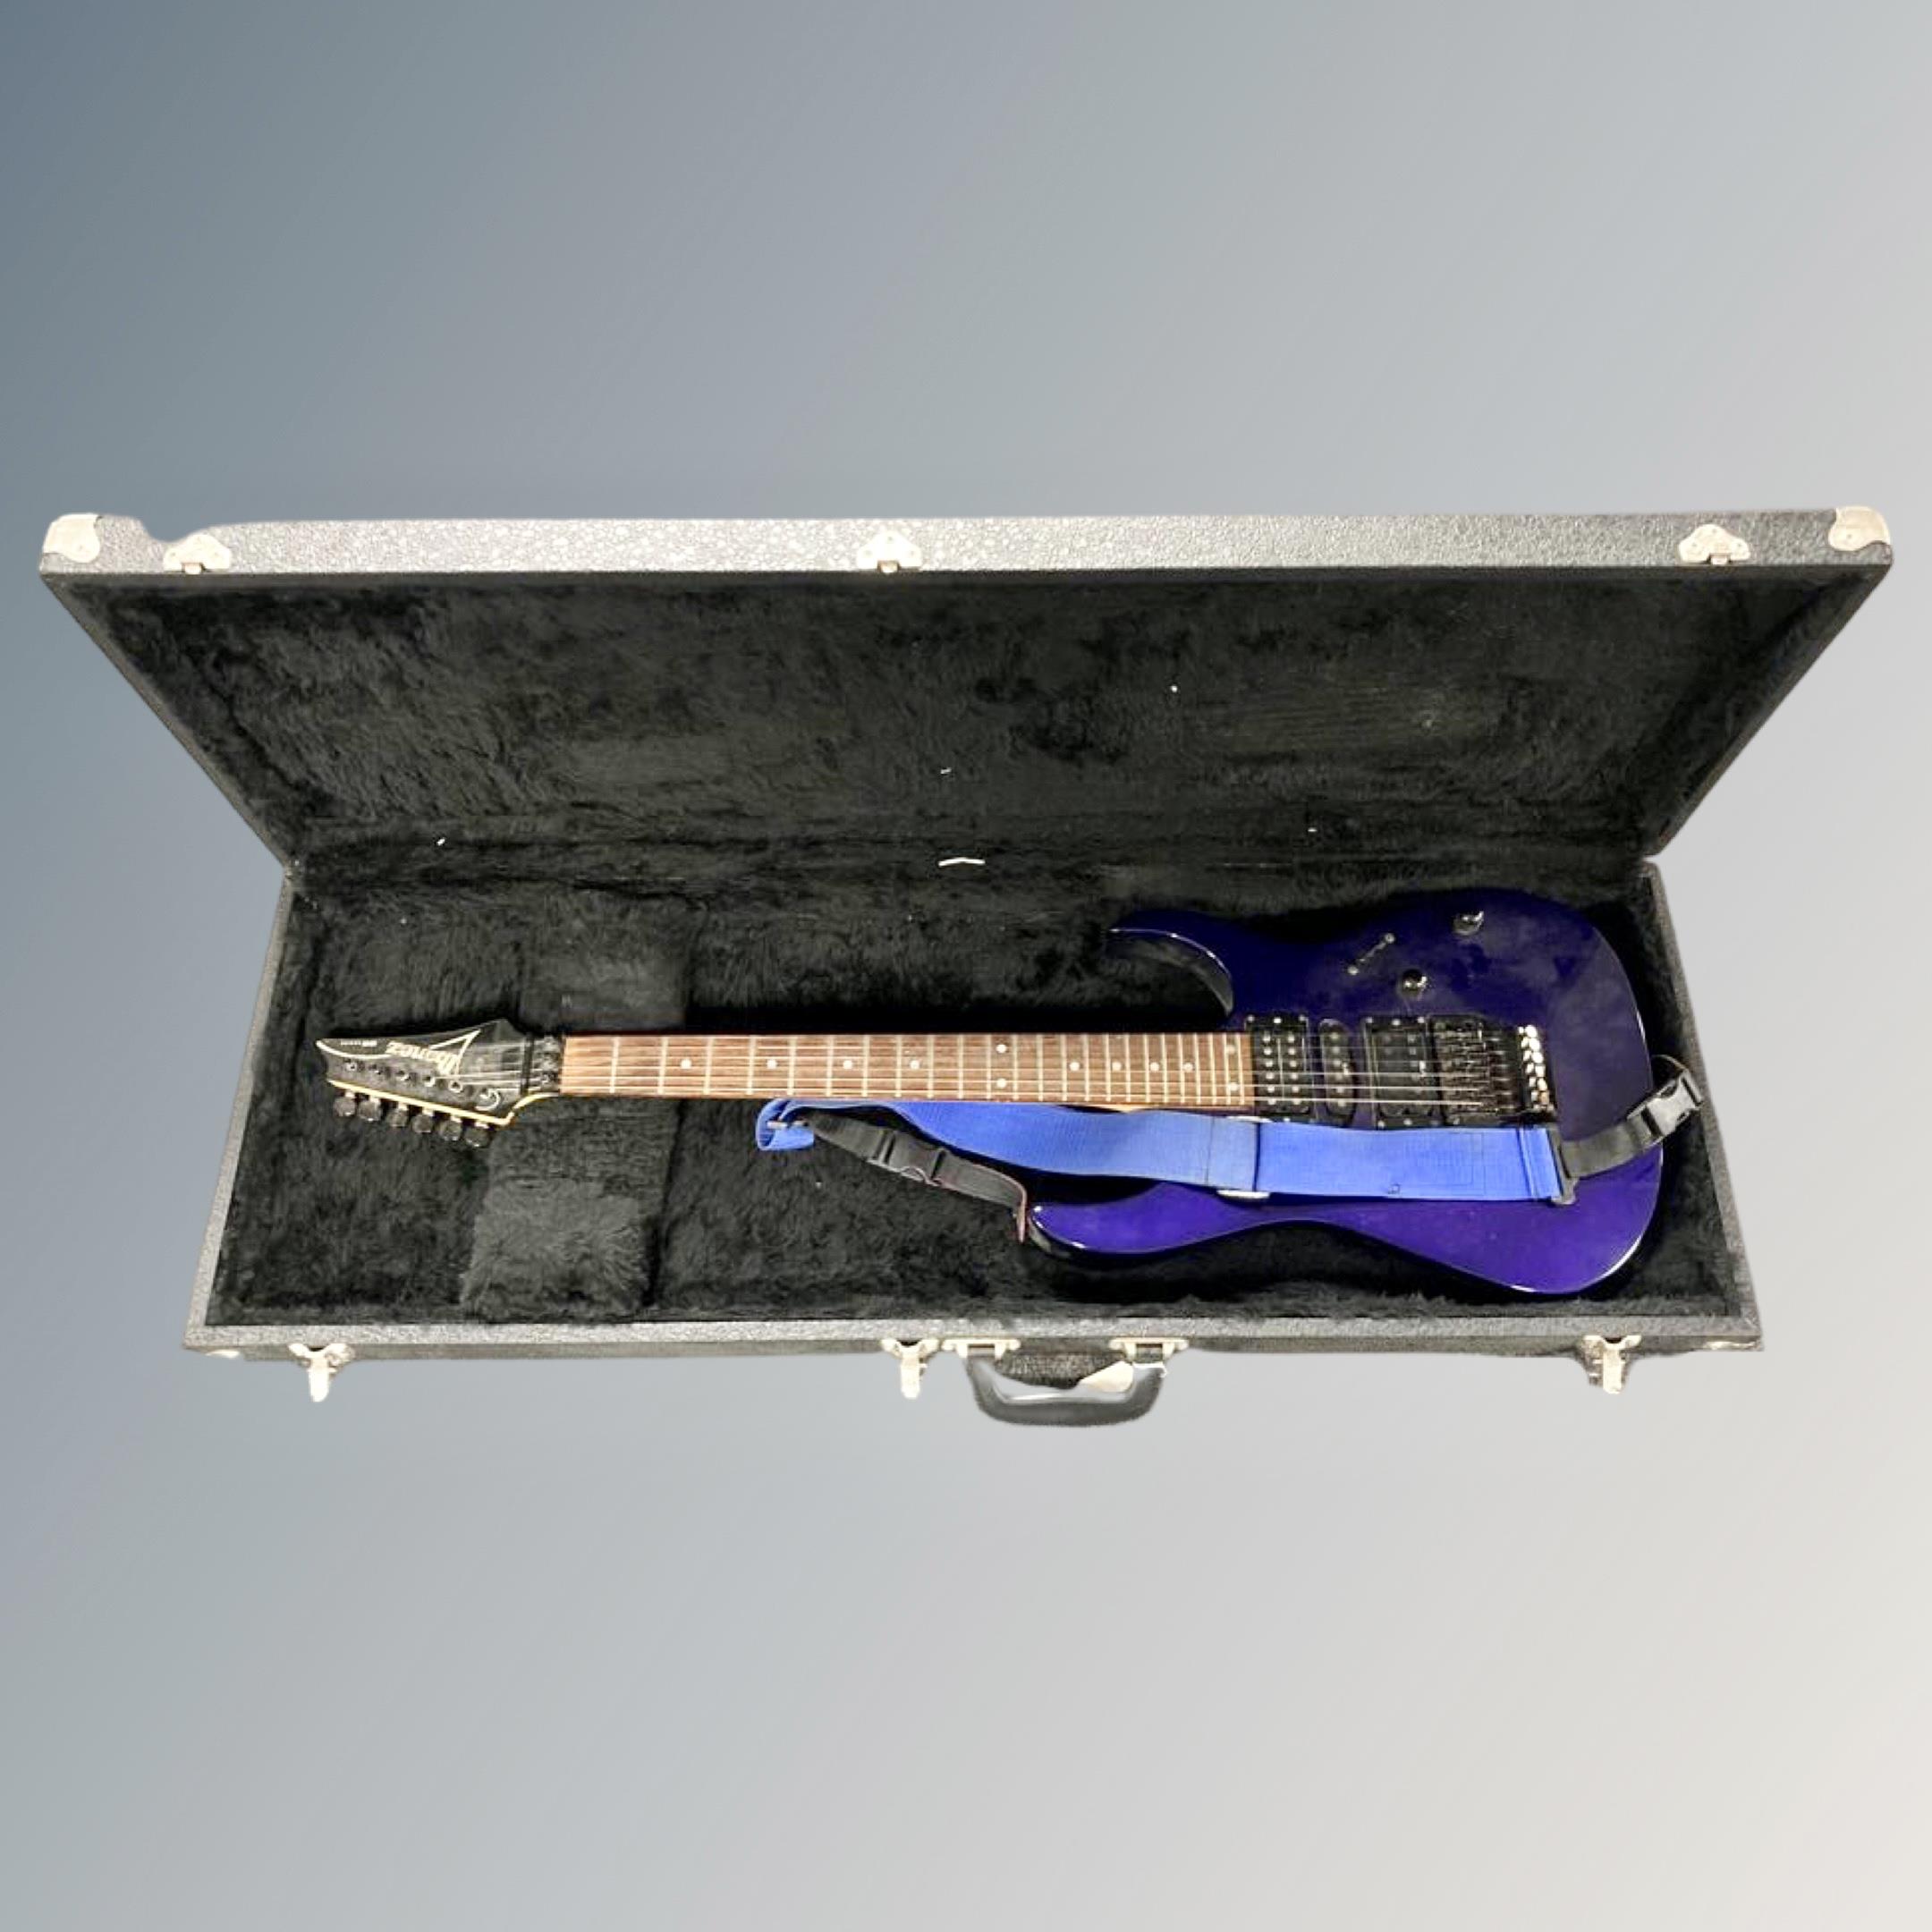 An Ibanez electric guitar, serial number F9705221, Made in Japan, in hard carry case.